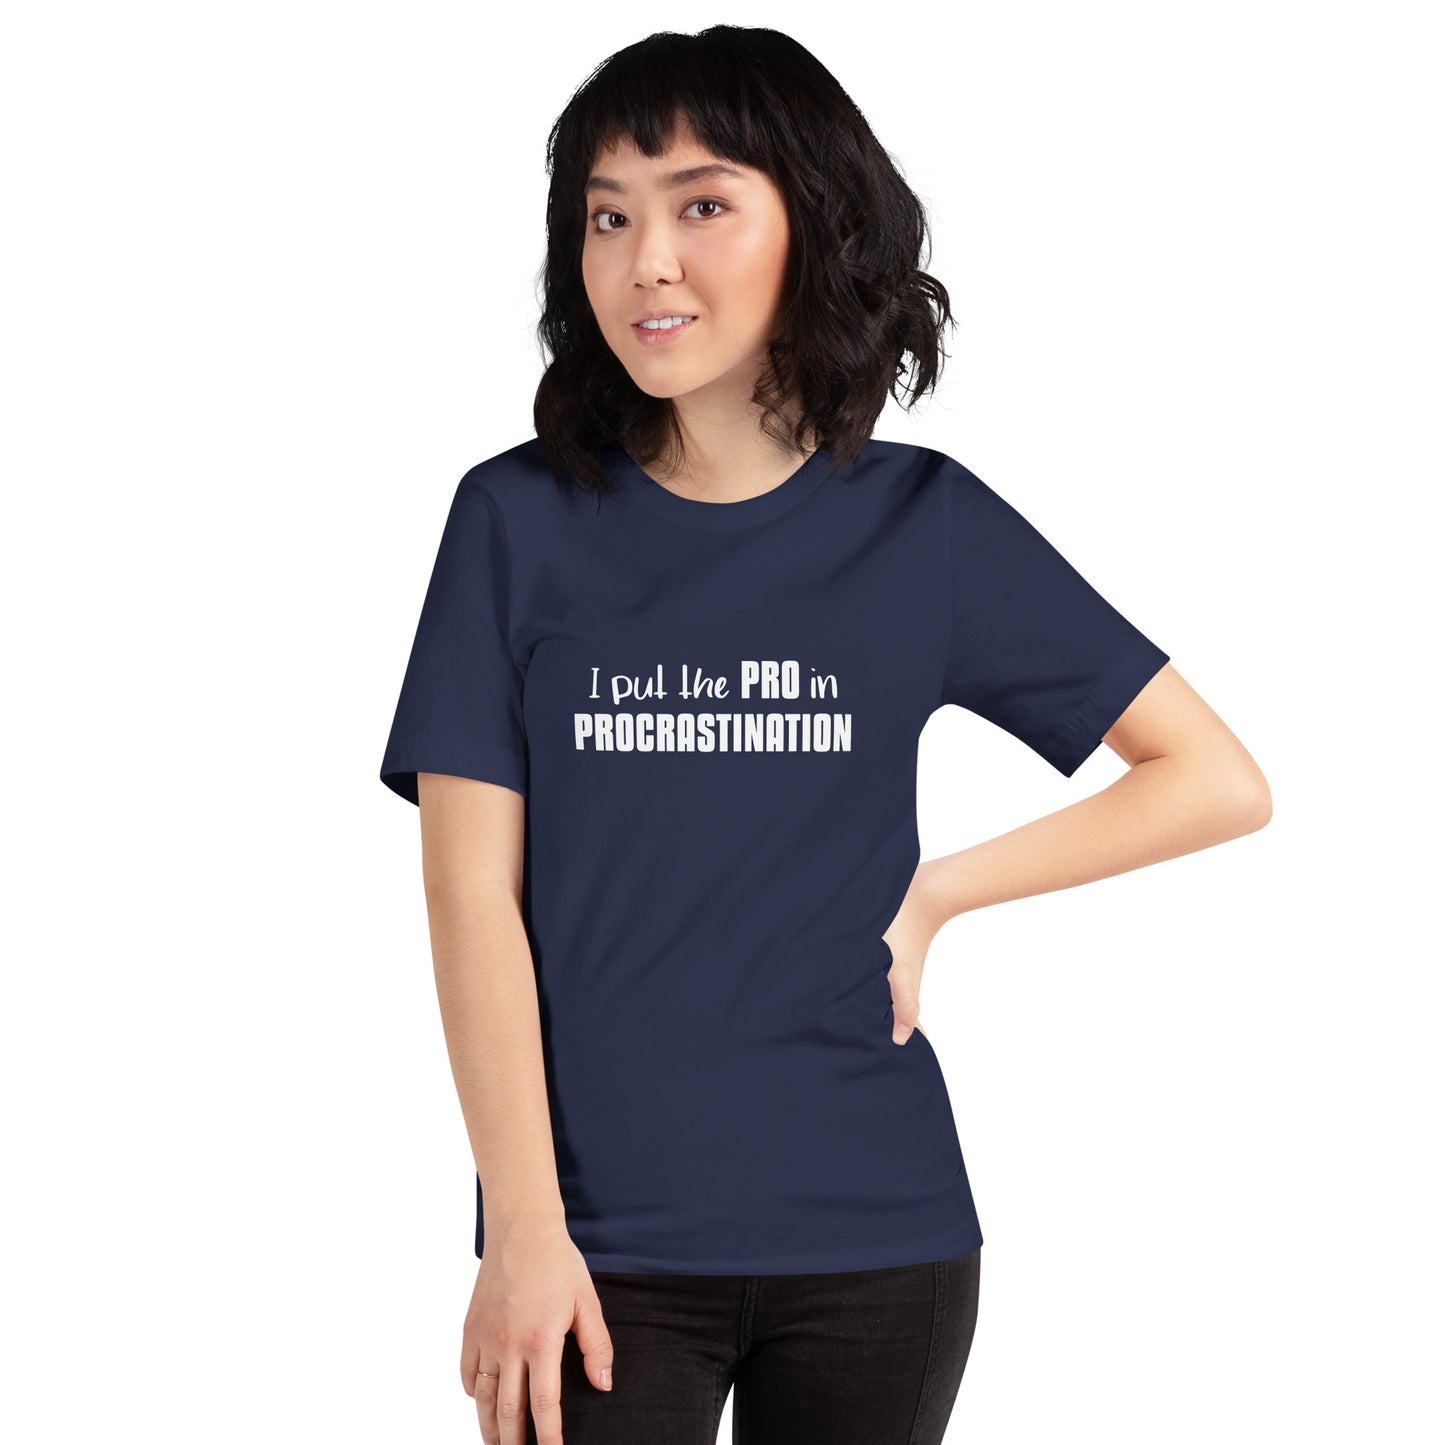 Female model wearing Navy unisex t-shirt with text graphic: "I put the PRO in PROCRASTINATION"